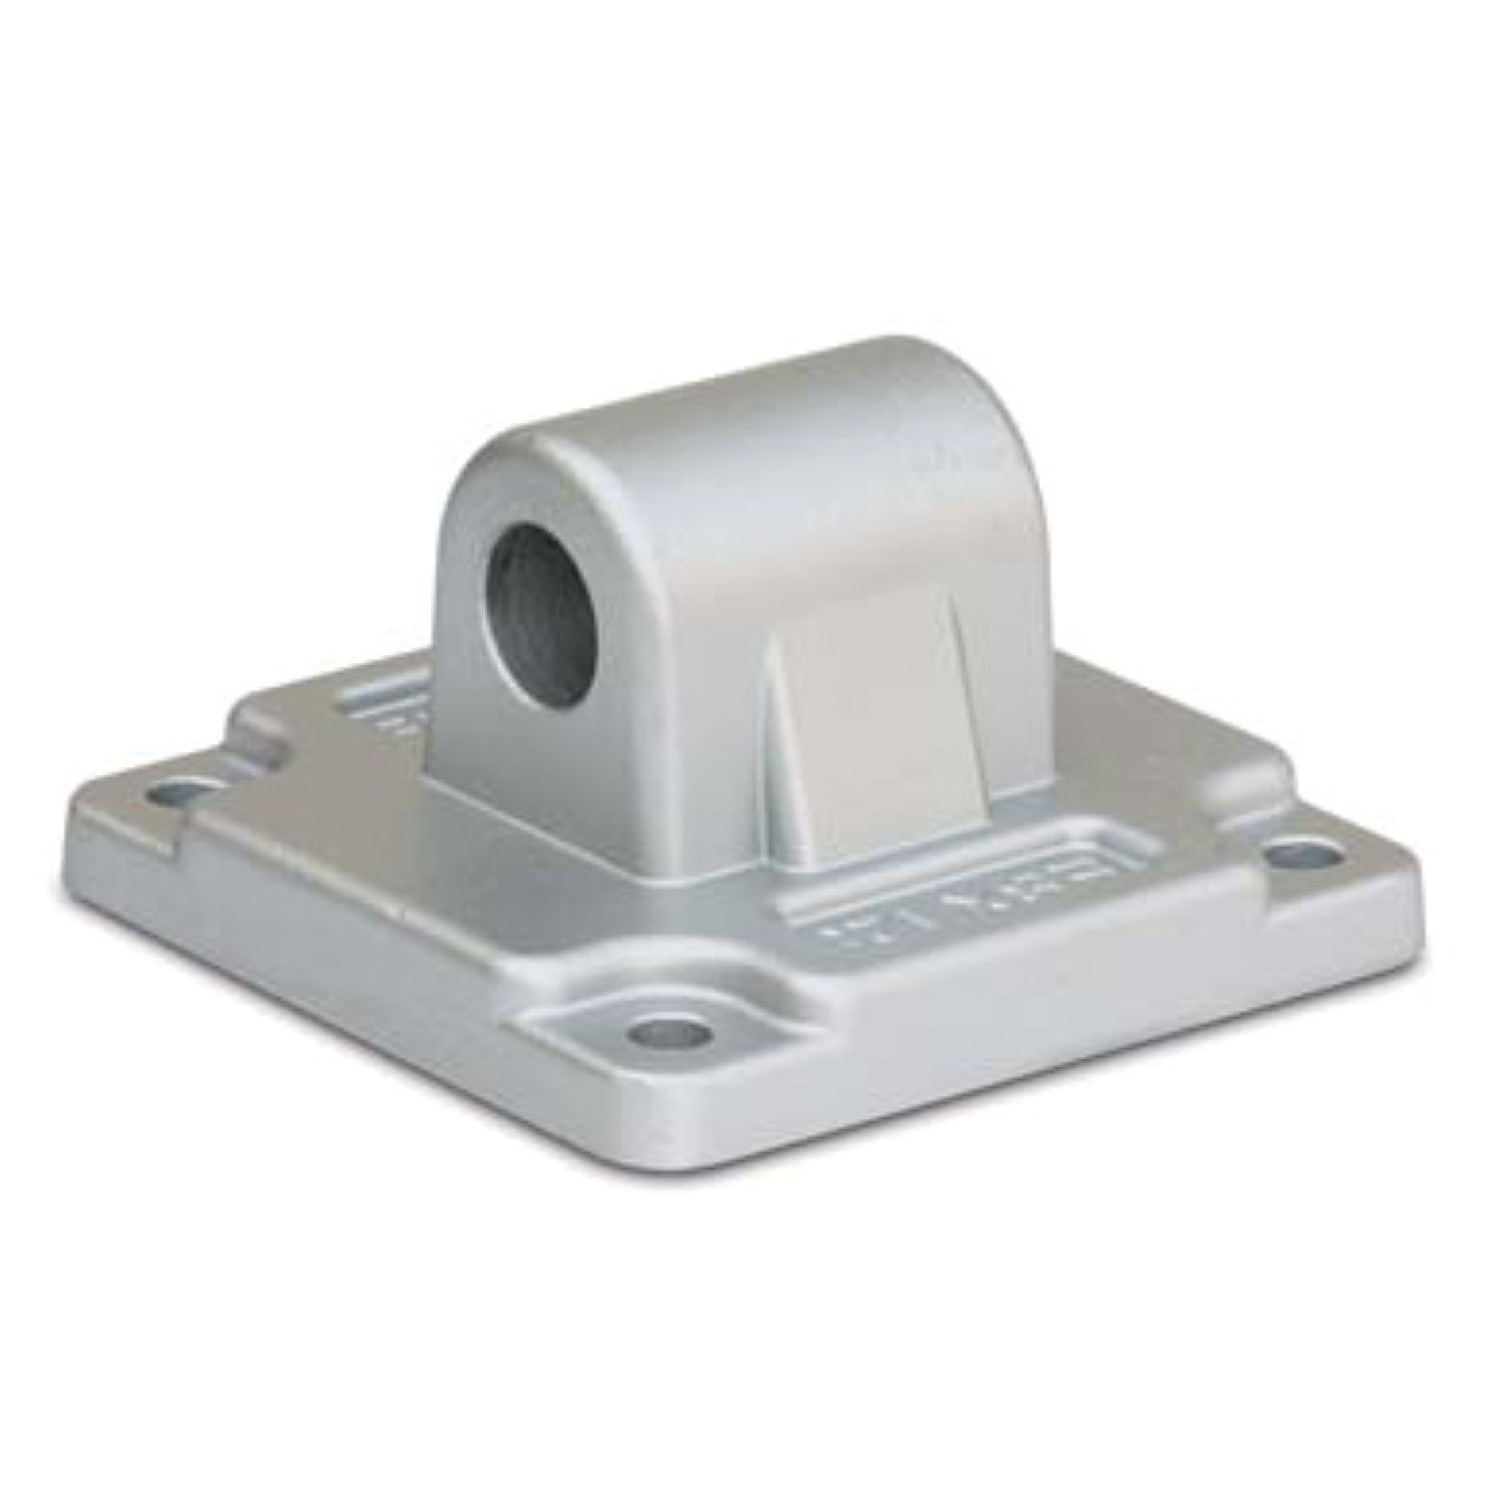 Product L4808, Air Cylinder Mounts - ISO Series EBX mounting foot / 